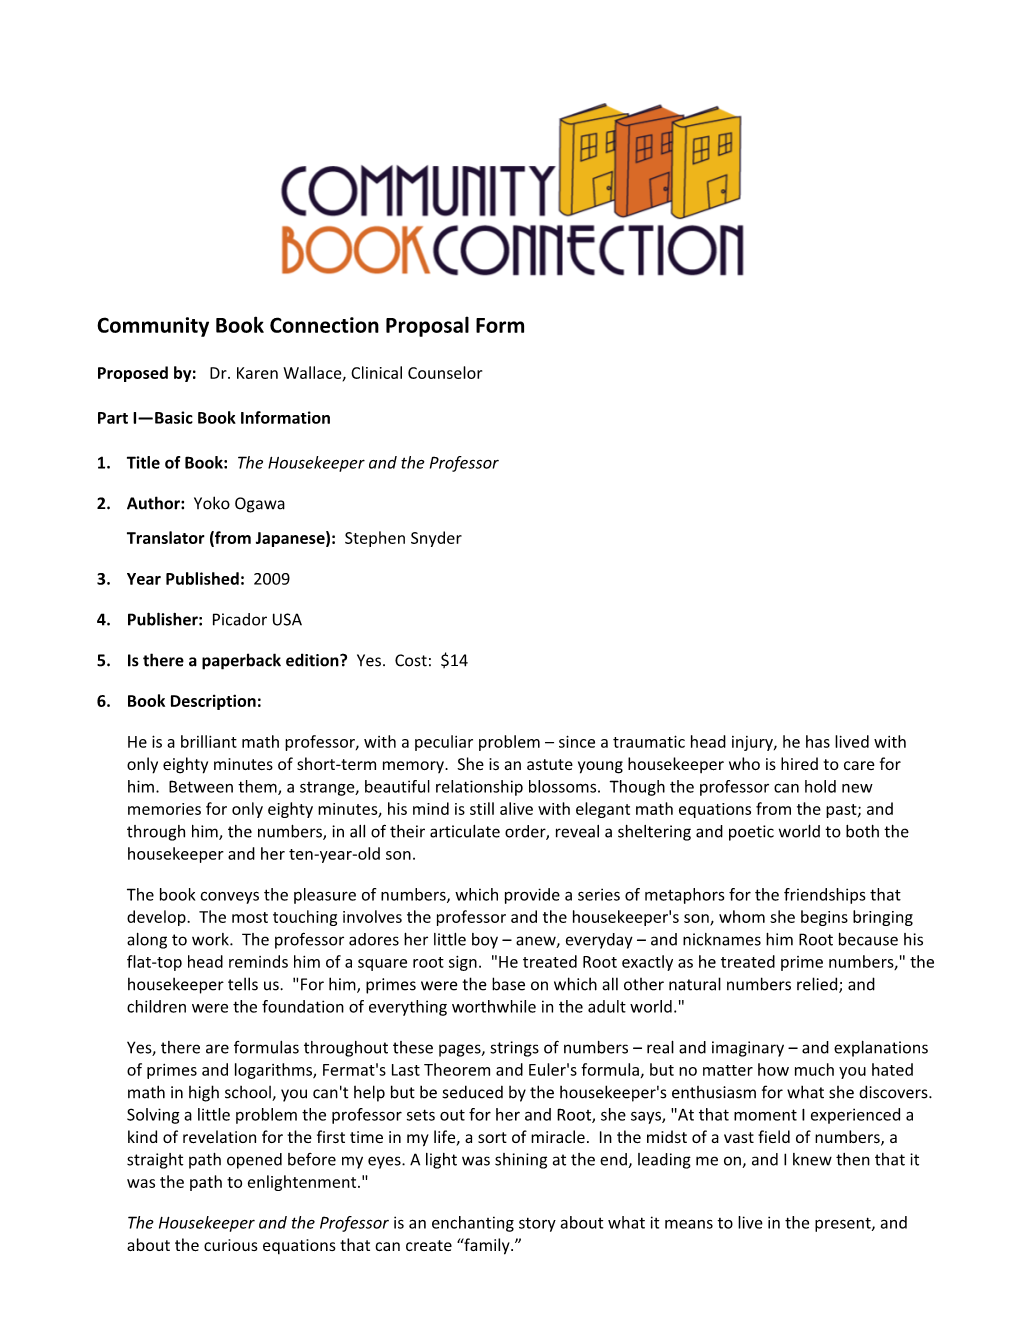 Community Book Connection Proposal Form